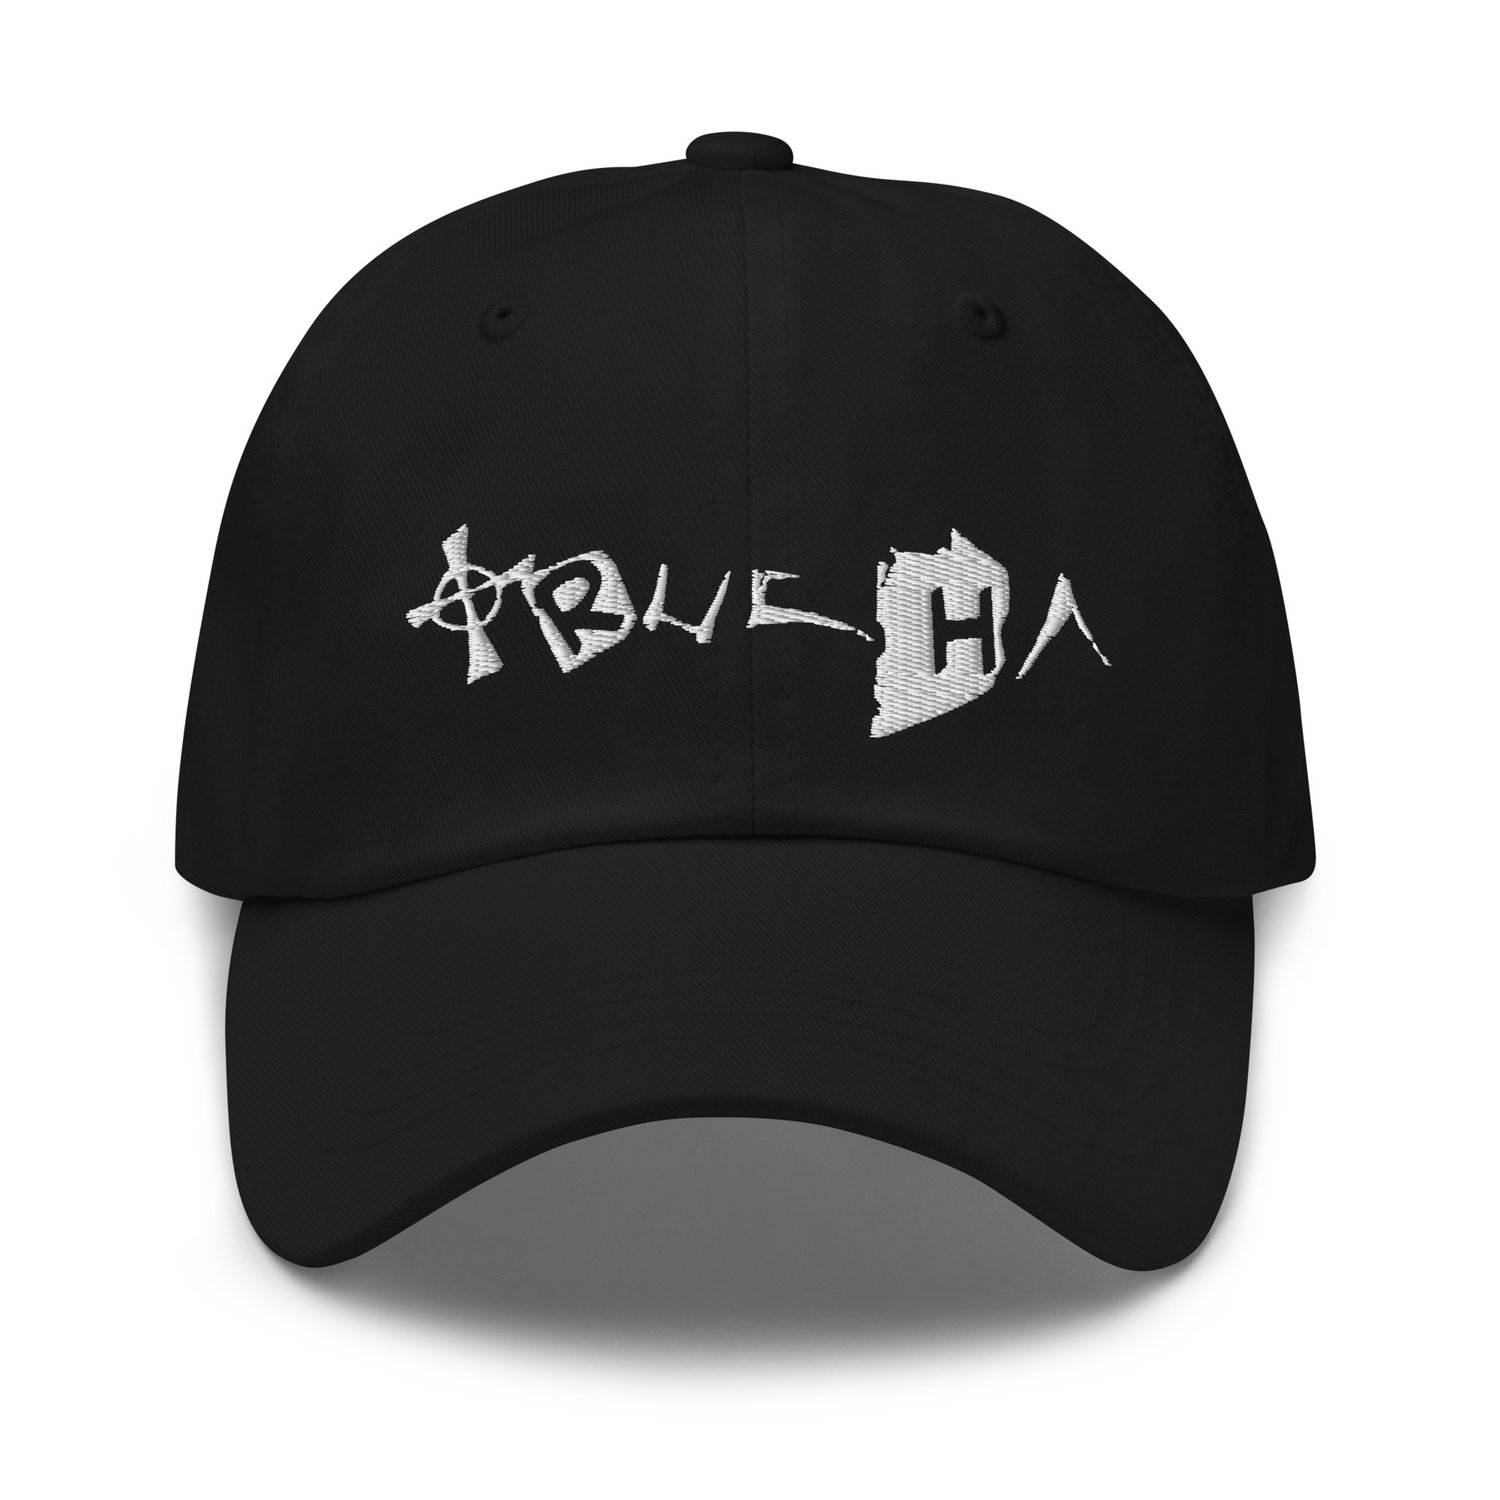 TRUCHA by N8NOFACE Embroidered Dad hat